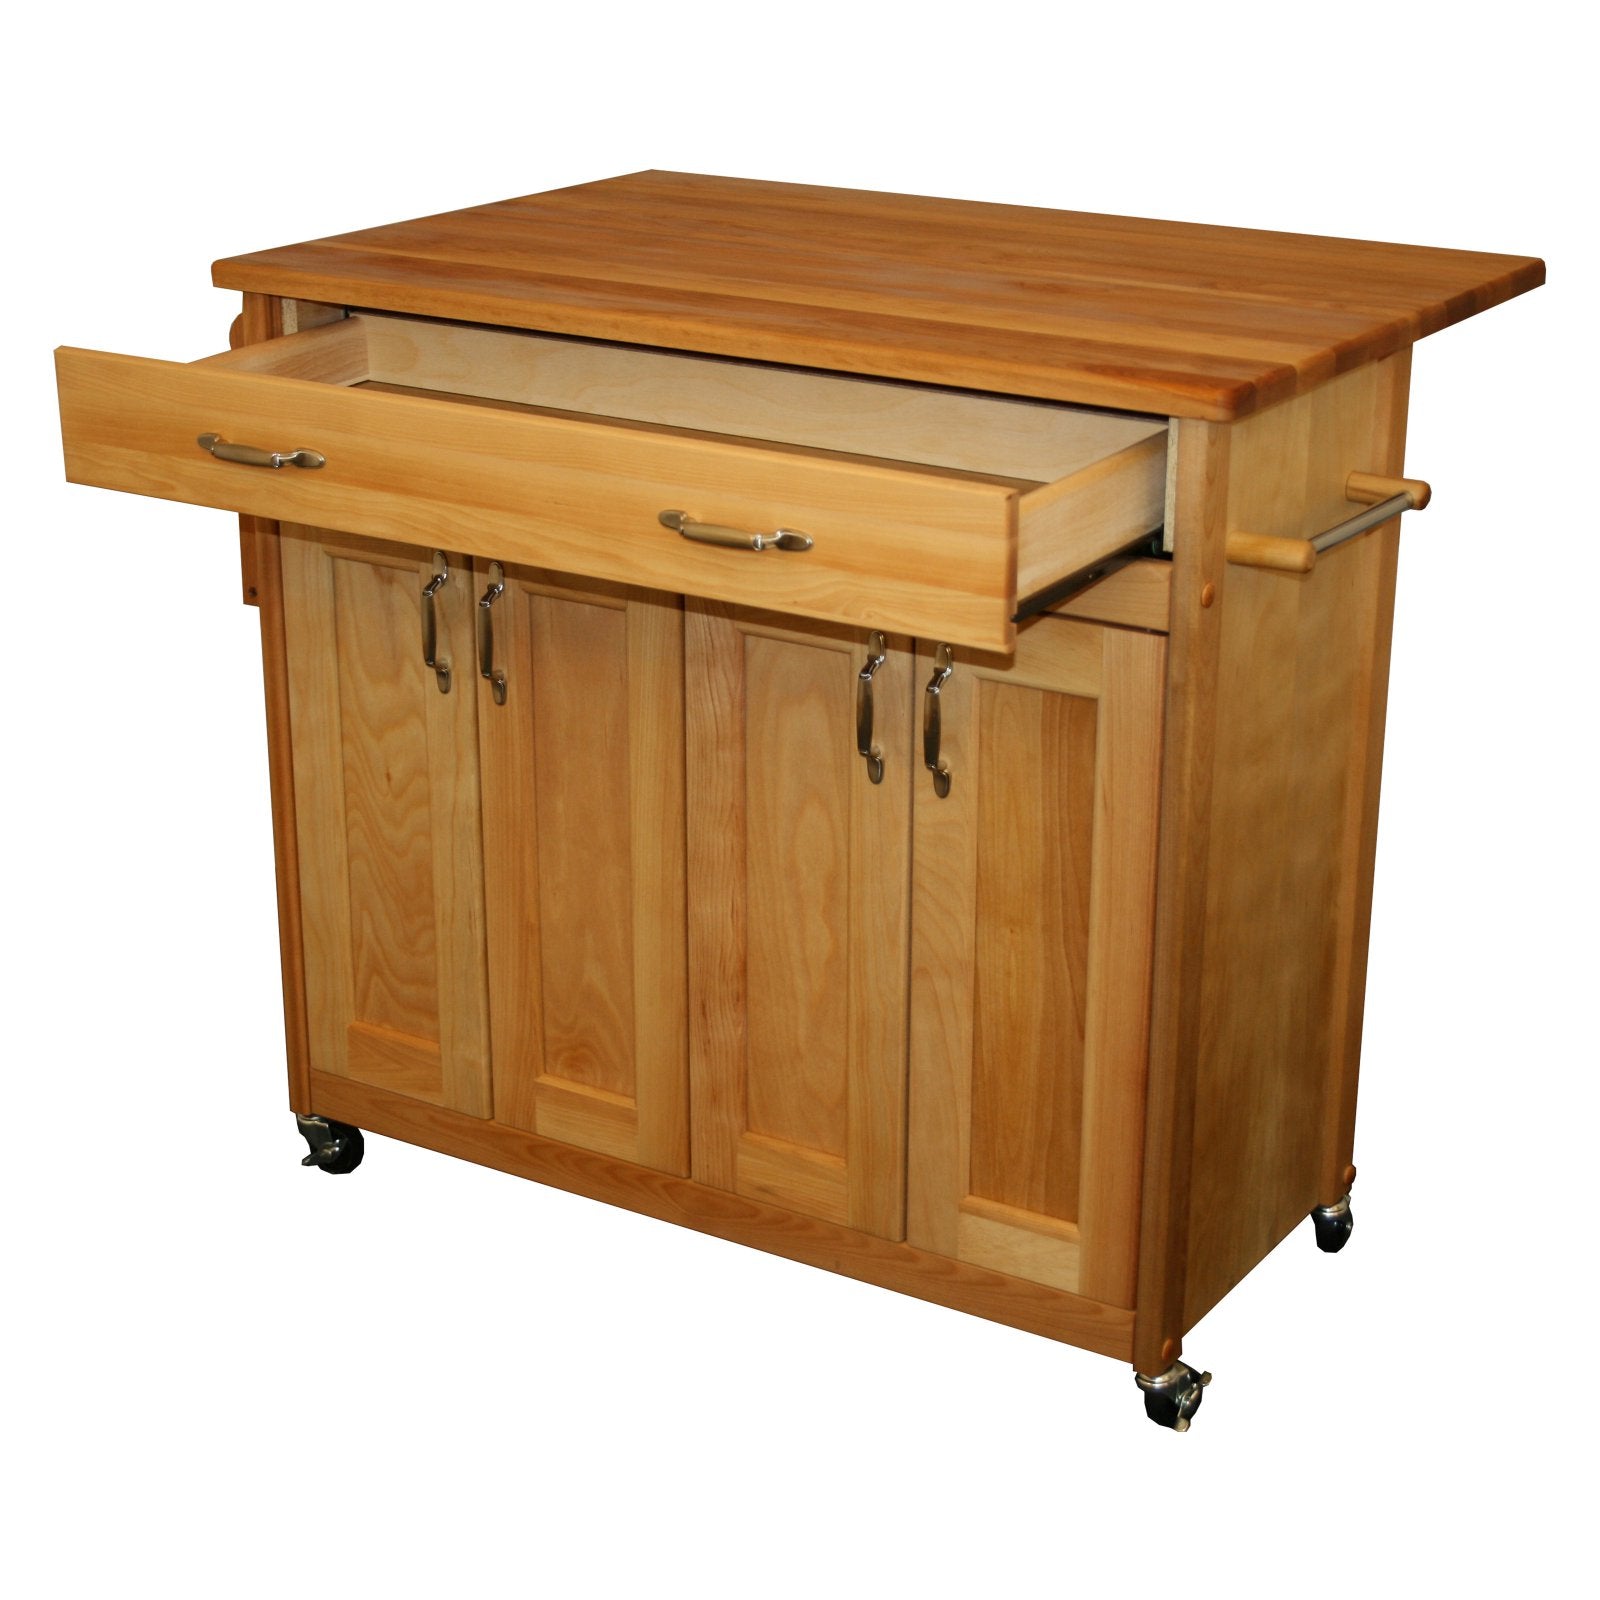 Catskill Mid-Sized Wood Island with Flat Panel Doors and Drop Leaf in Oak